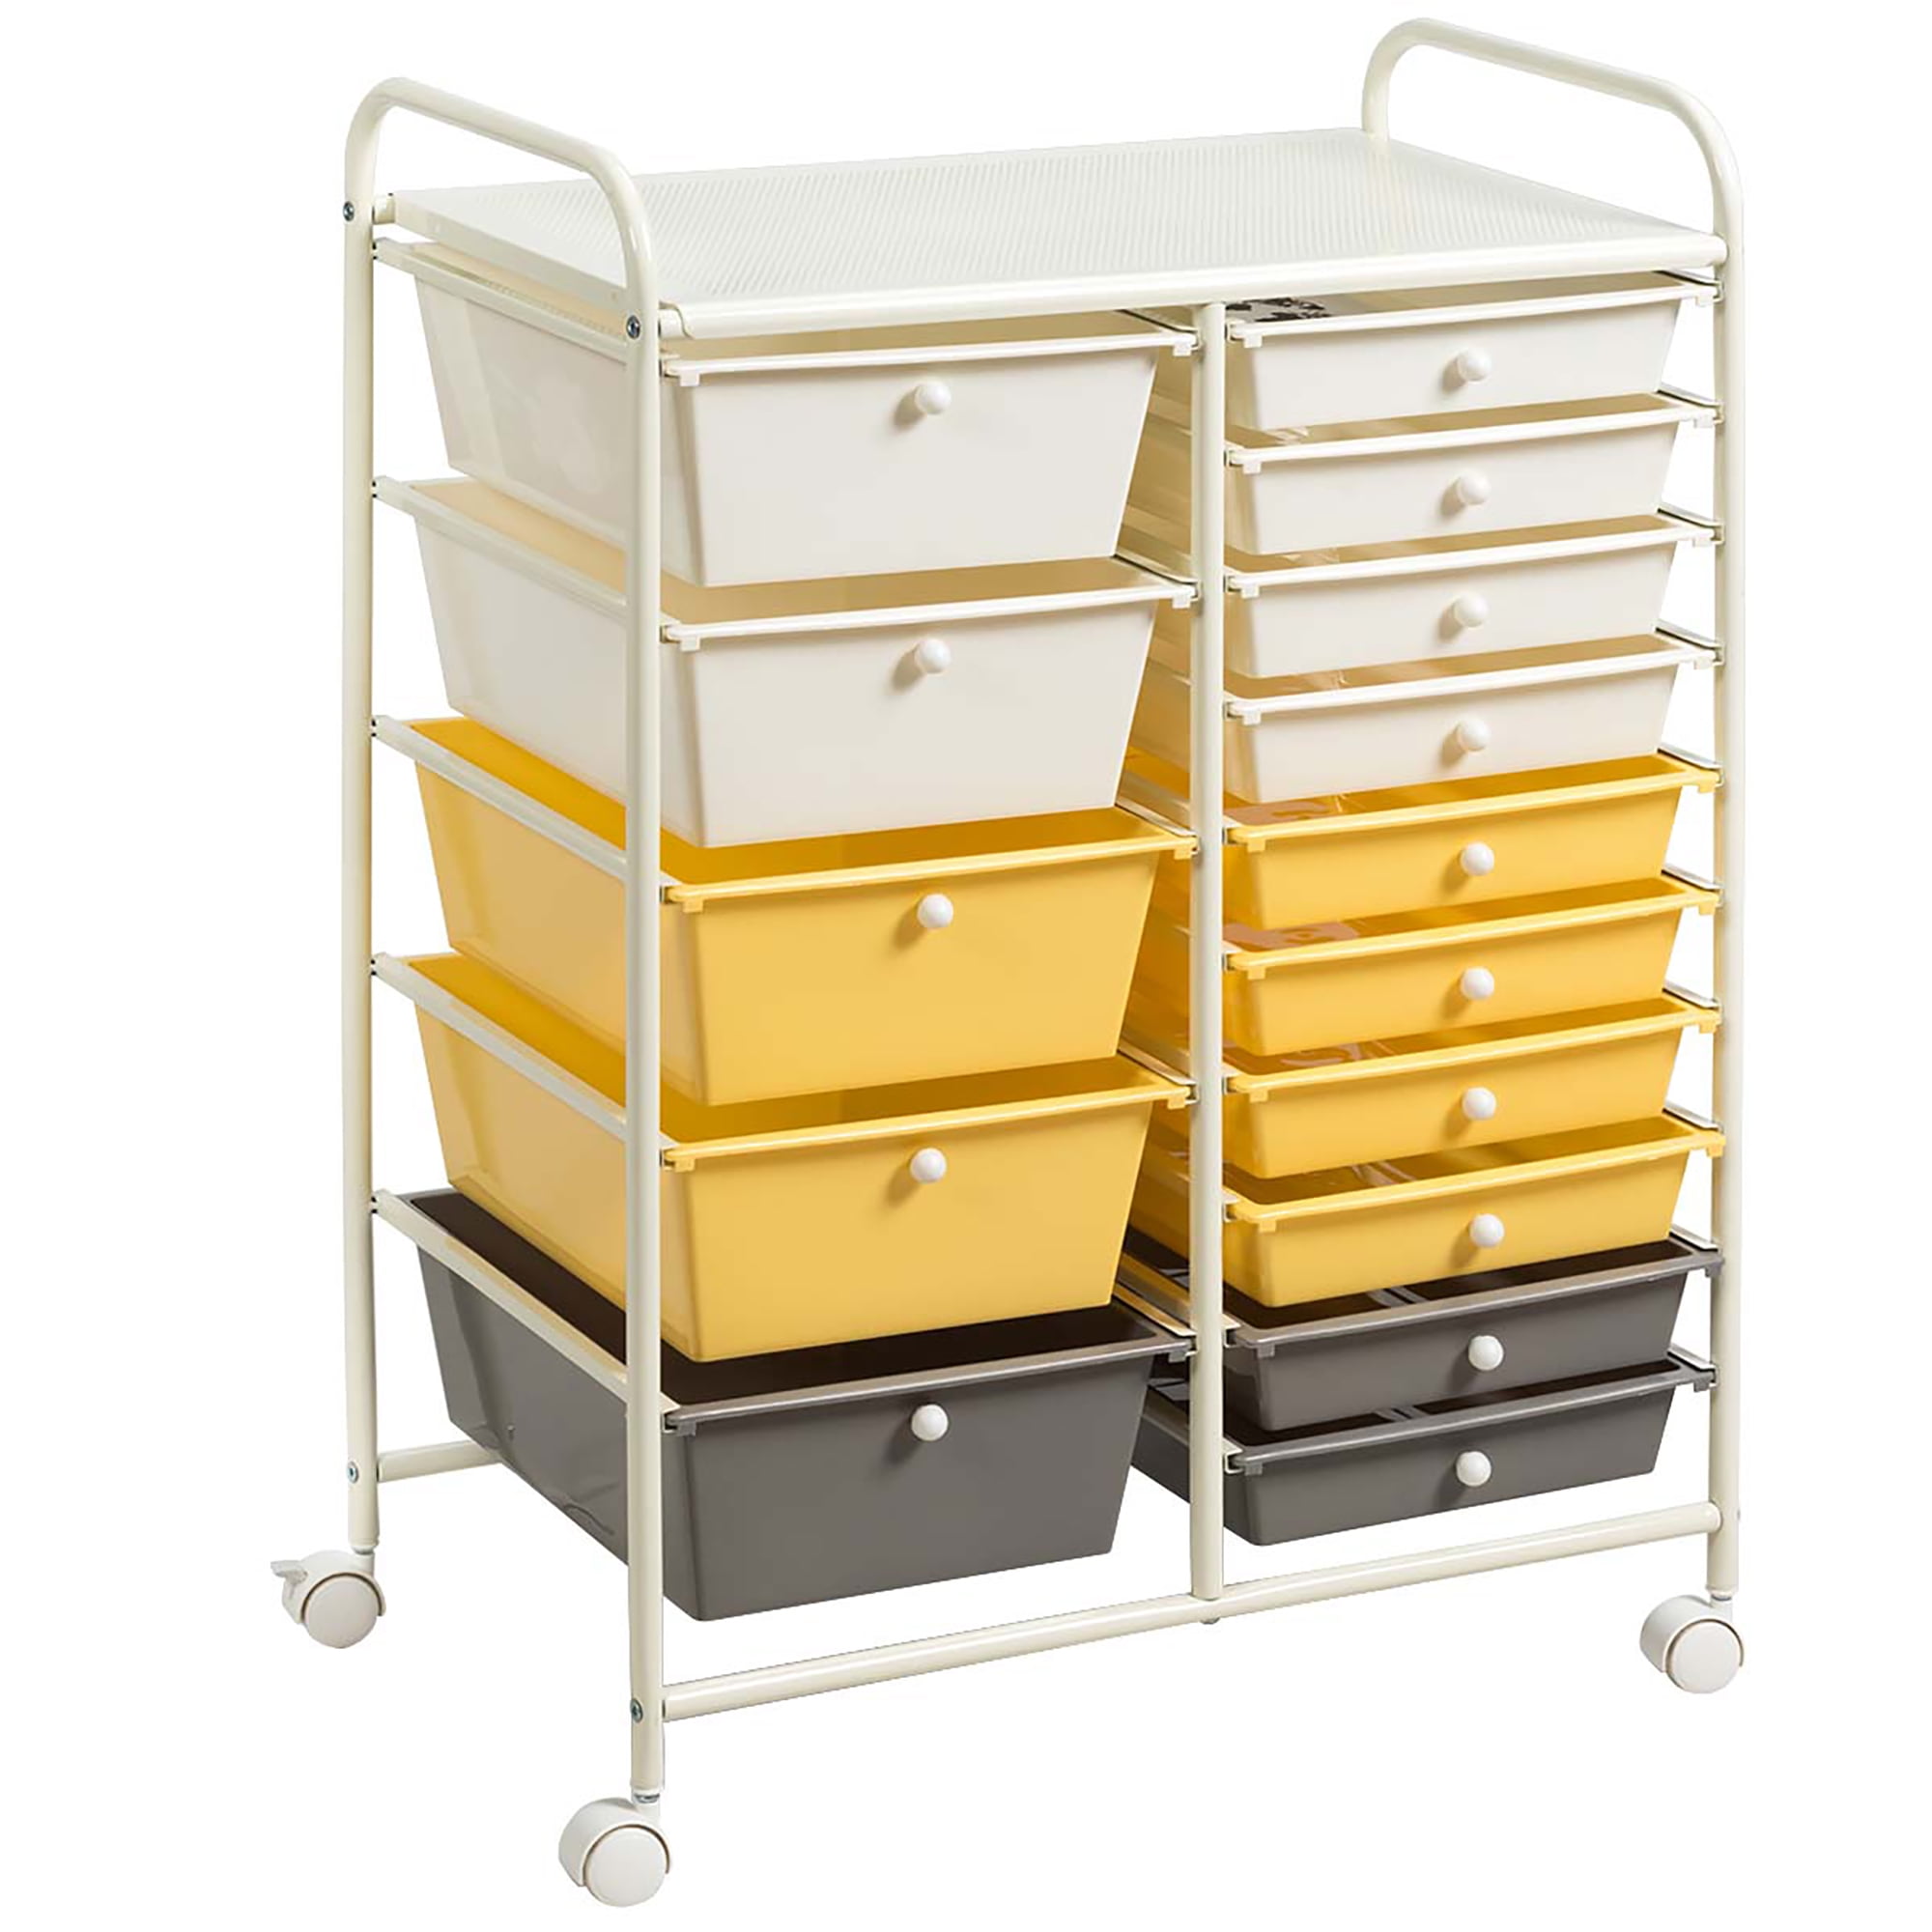 IRIS 4-Drawer Storage Cart with Organizer Top, Black/Pearl, 41.8 qt. 594401  - The Home Depot